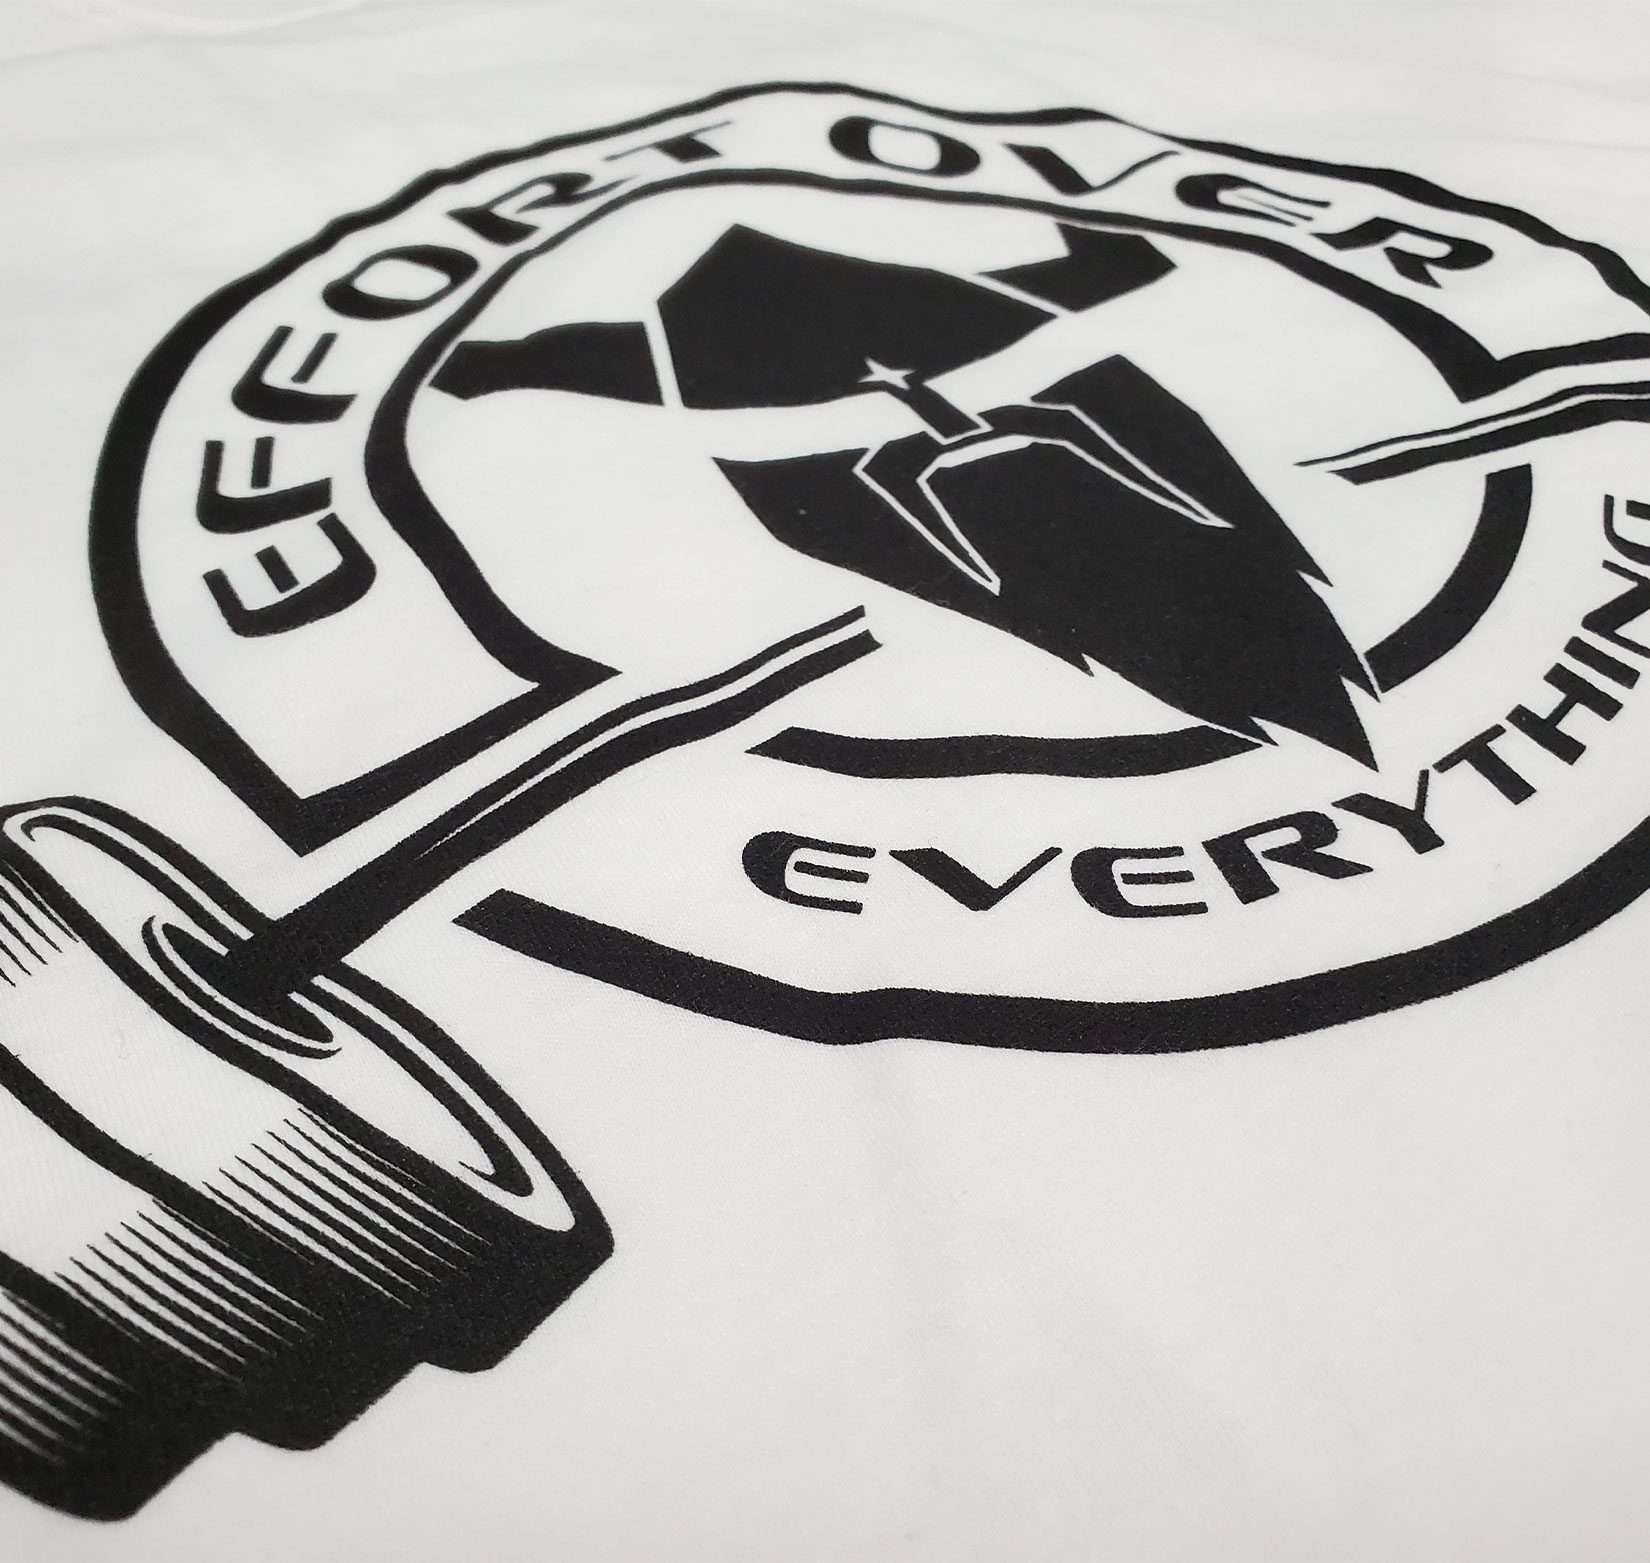 A closeup of a black “effort over everything” logo screen printed on a white shirt